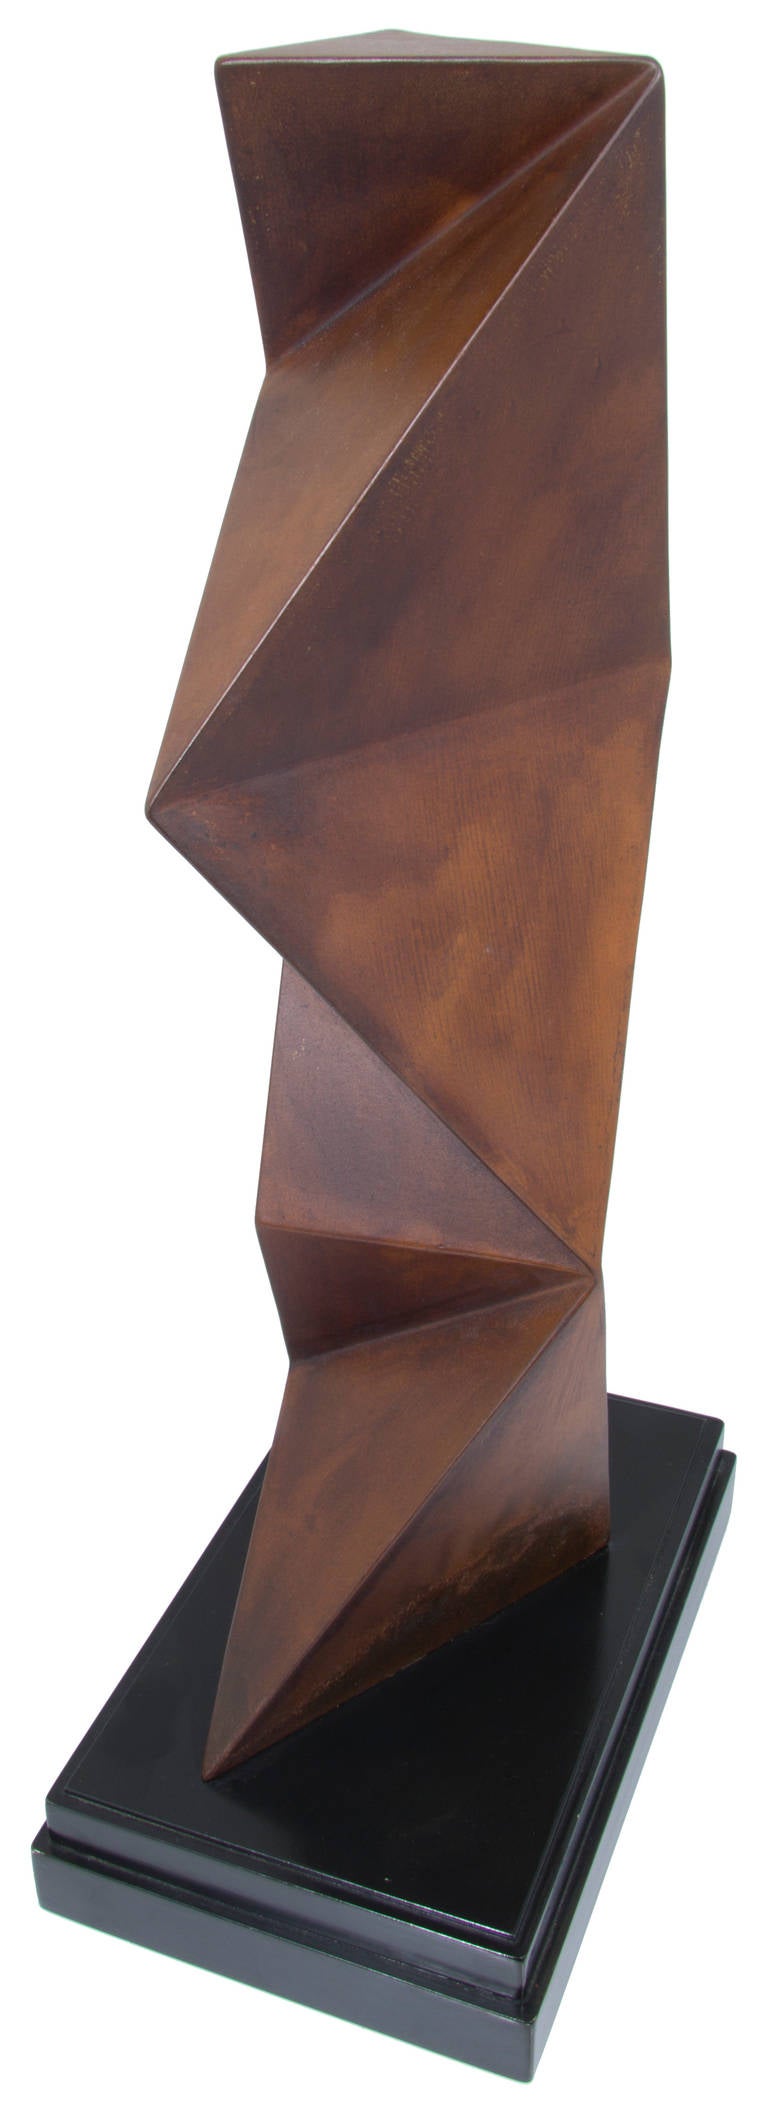 This is a wonderful, strong sculpture by Silverman. Silverman was born in New York in 1923 and is known for his large public sculptures. This piece was done in 1994, towards the end of his career. It has a rich patina.